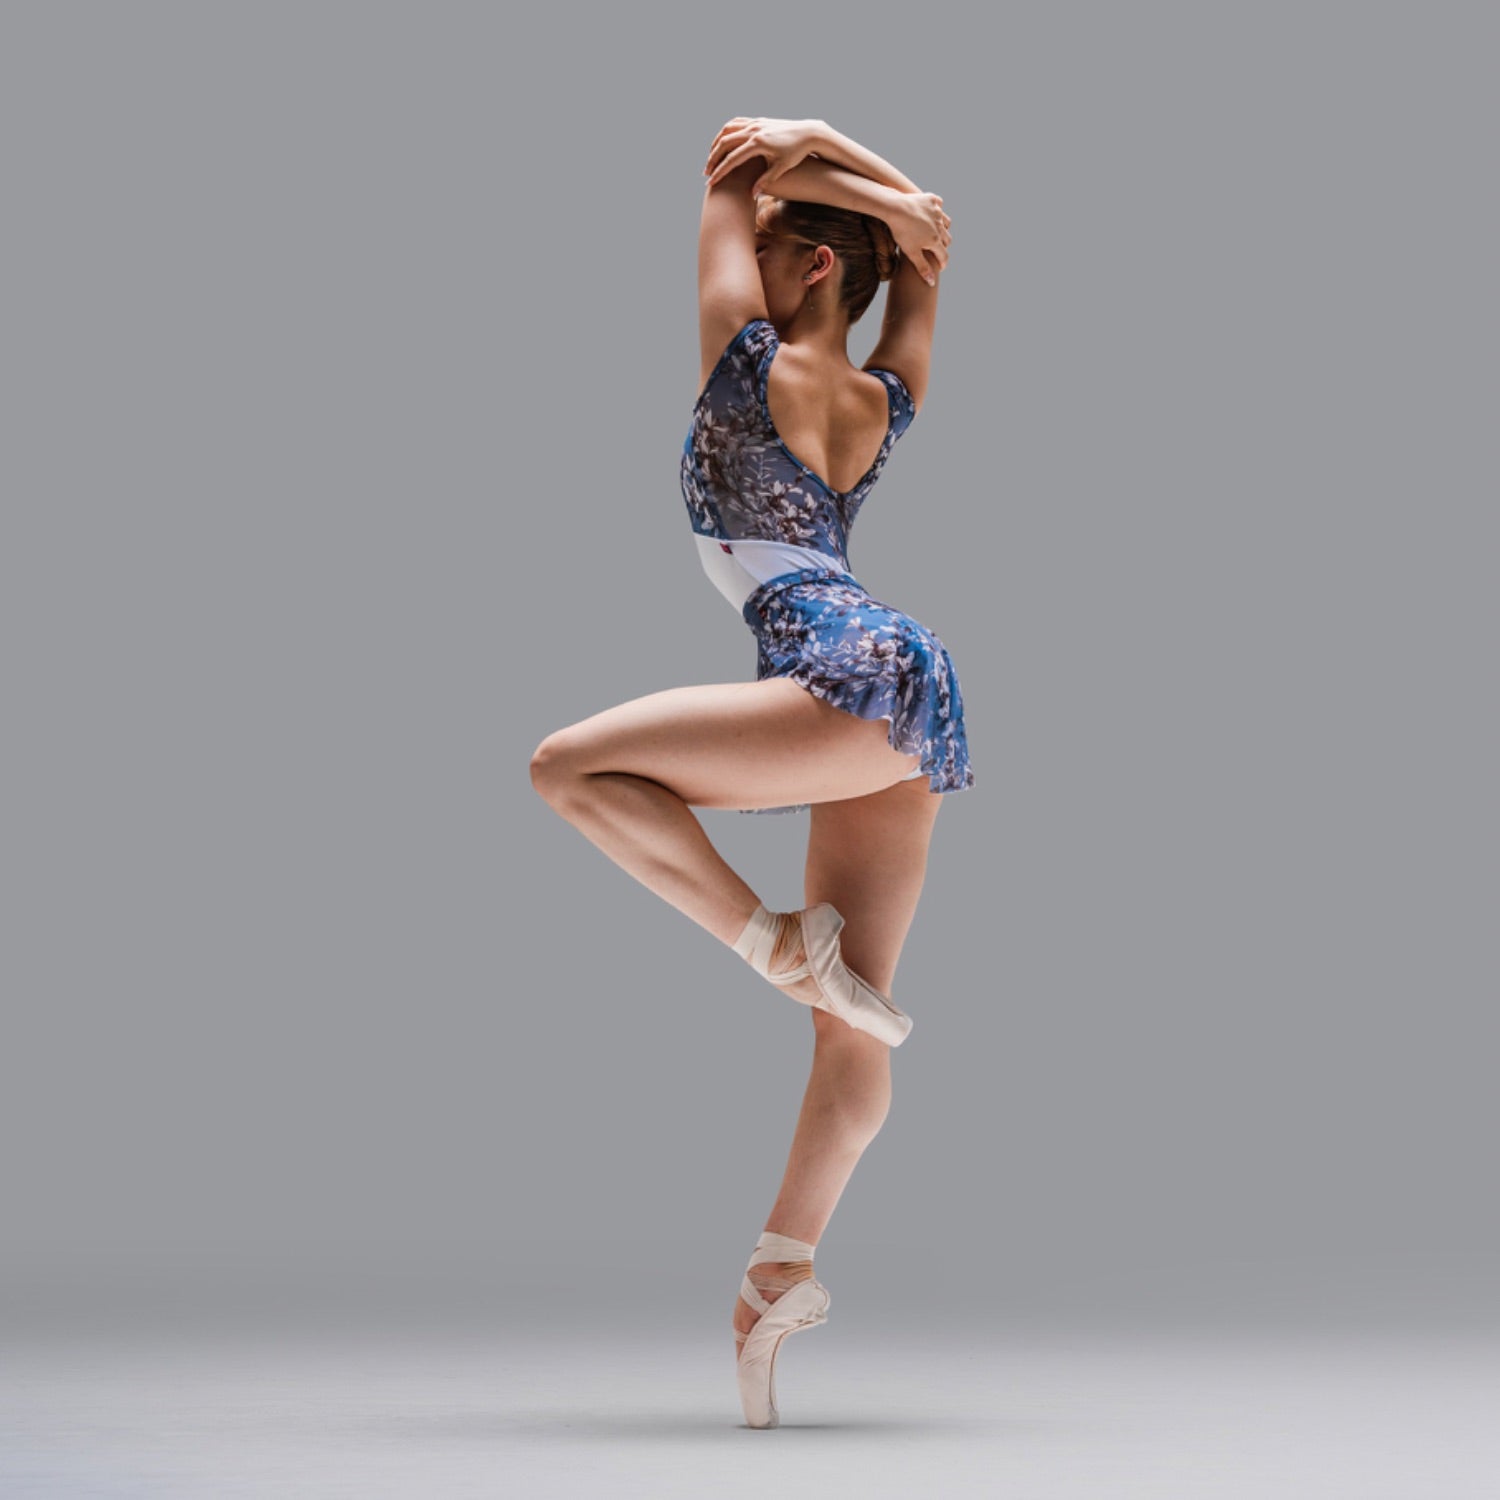 Play Dancer impose on pointe wearing a blue and white floral print leotard with matching SAB skirt